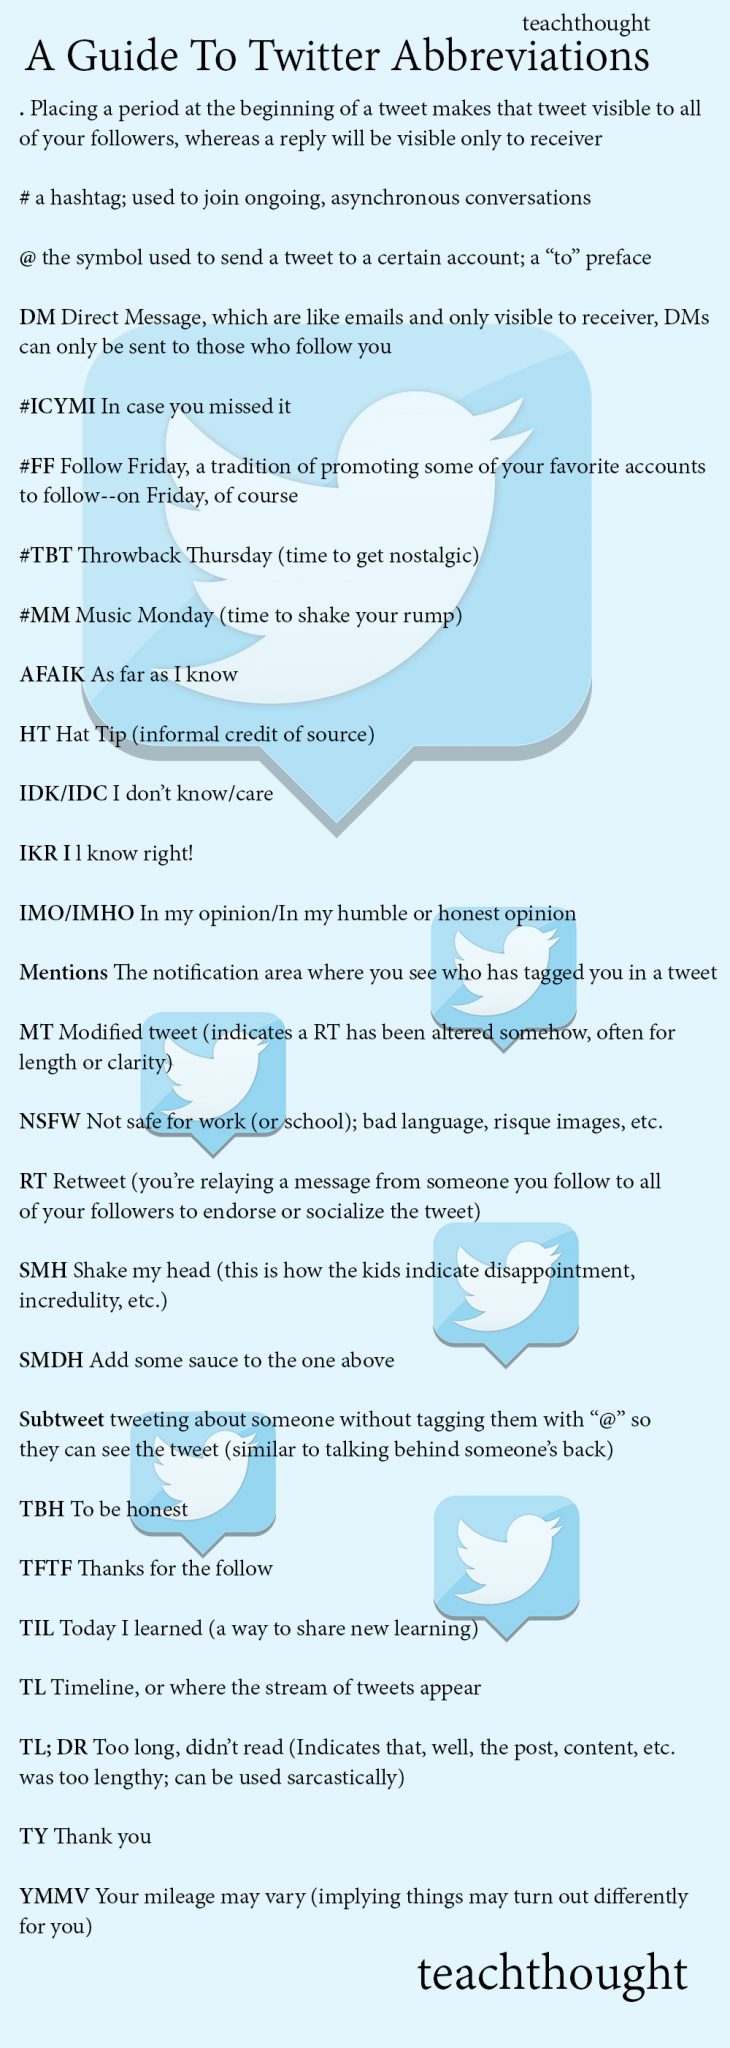 twitter-abbreviation-guide-education